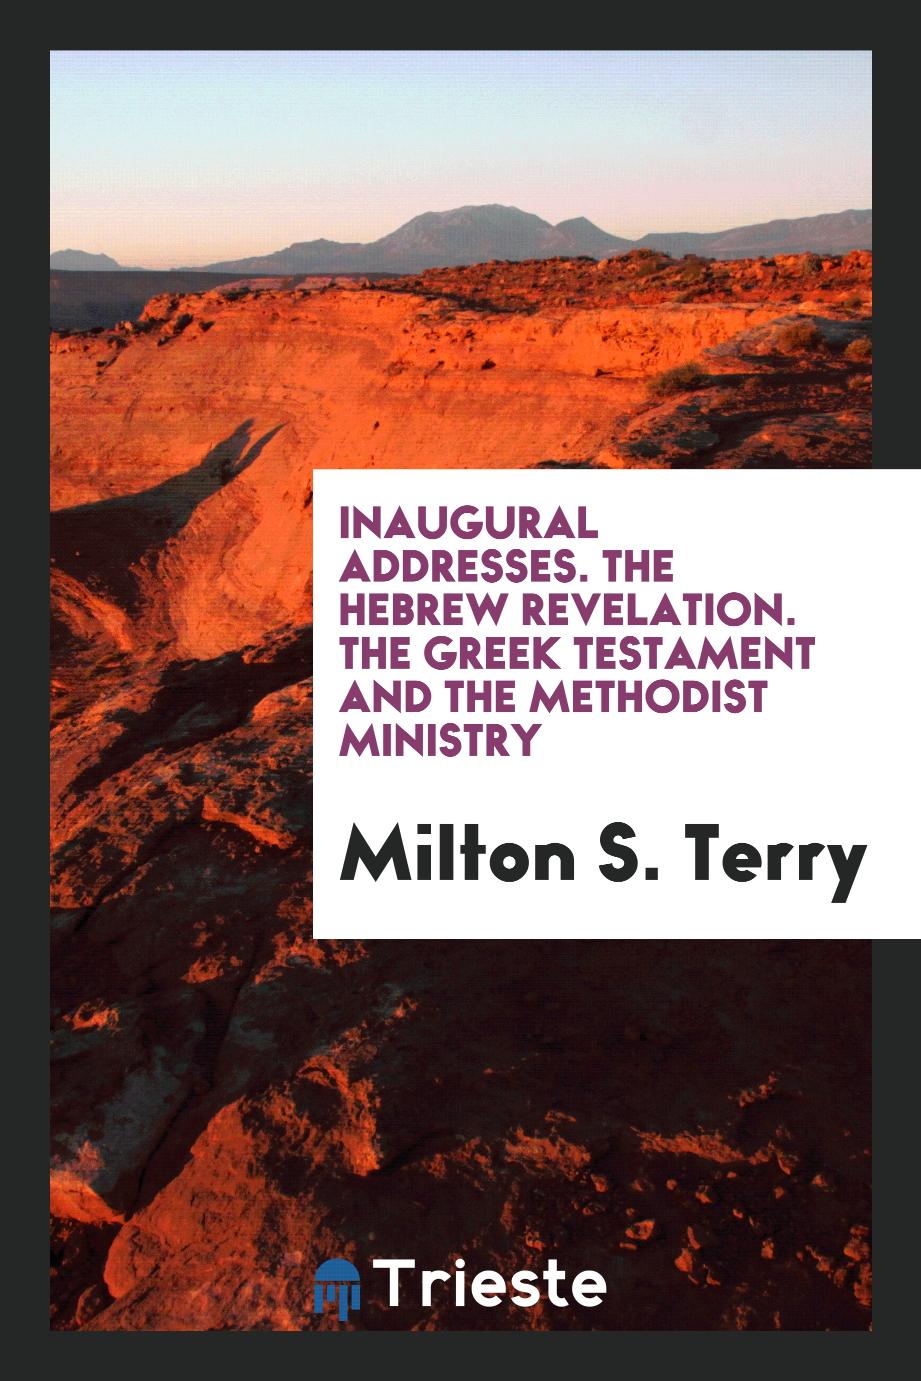 Inaugural Addresses. The Hebrew revelation. The Greek testament and the methodist ministry